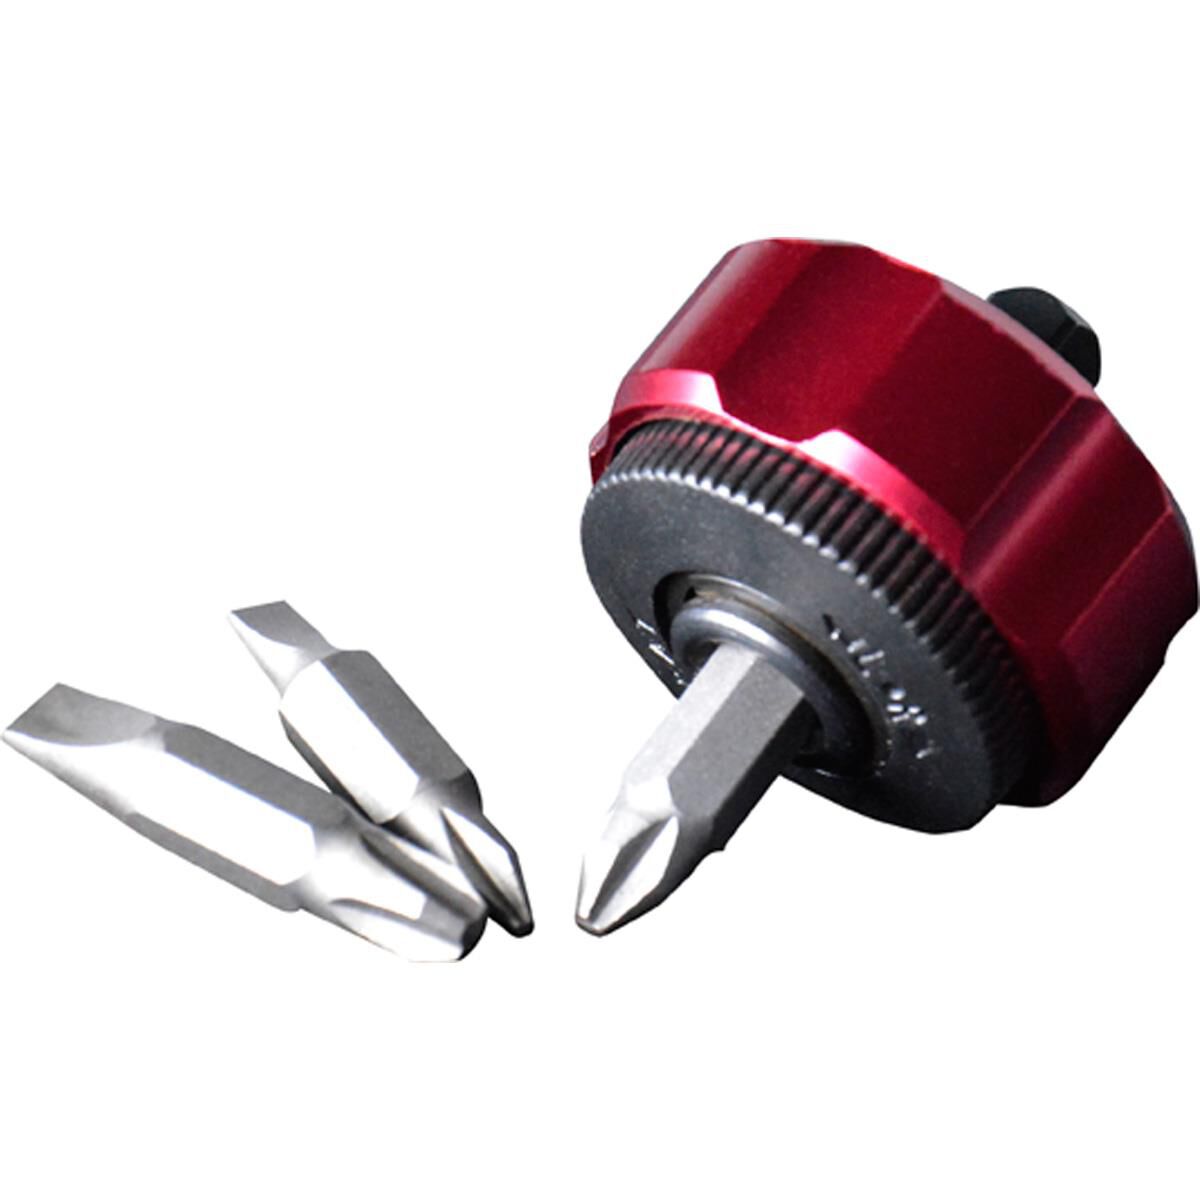 ToolPRO Ratchet Driver Palm 7 in 1, , scaau_hi-res